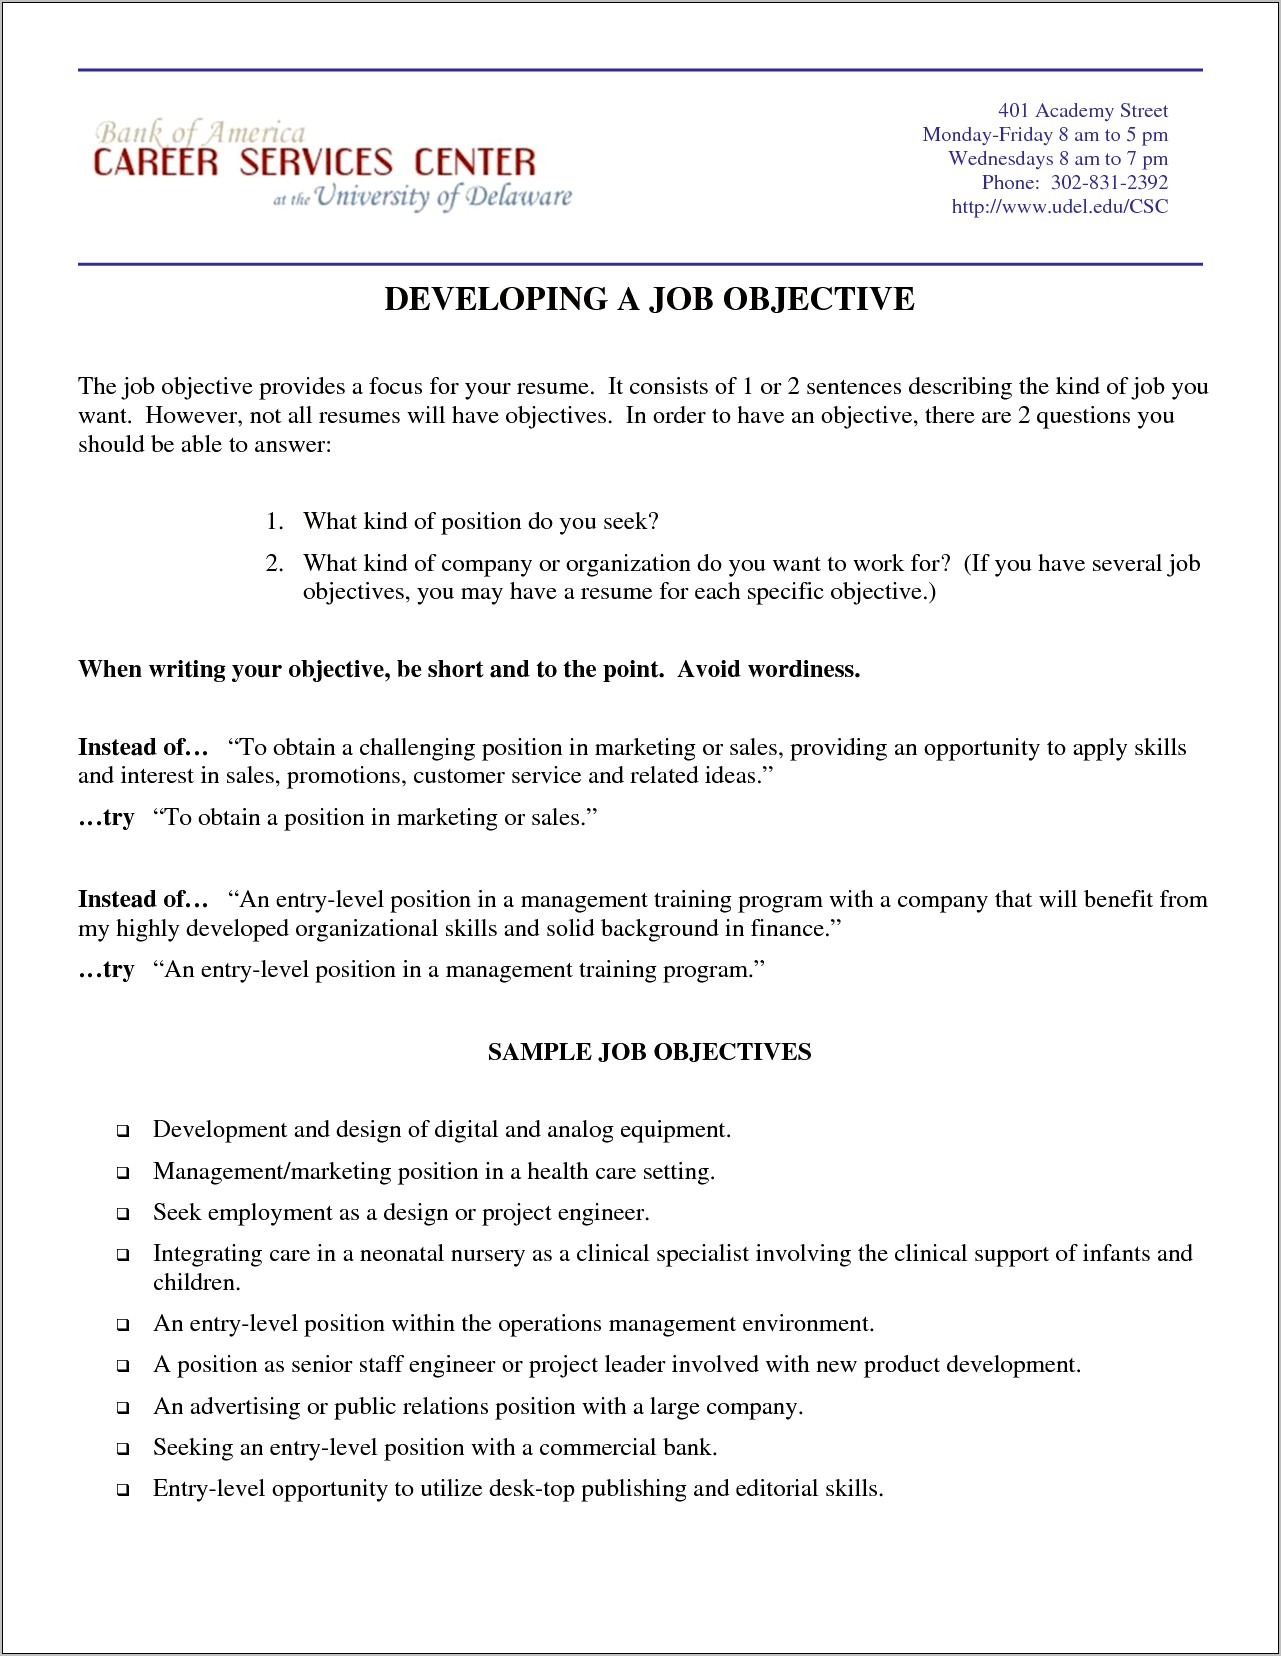 Resume Objective For Entry Level Position